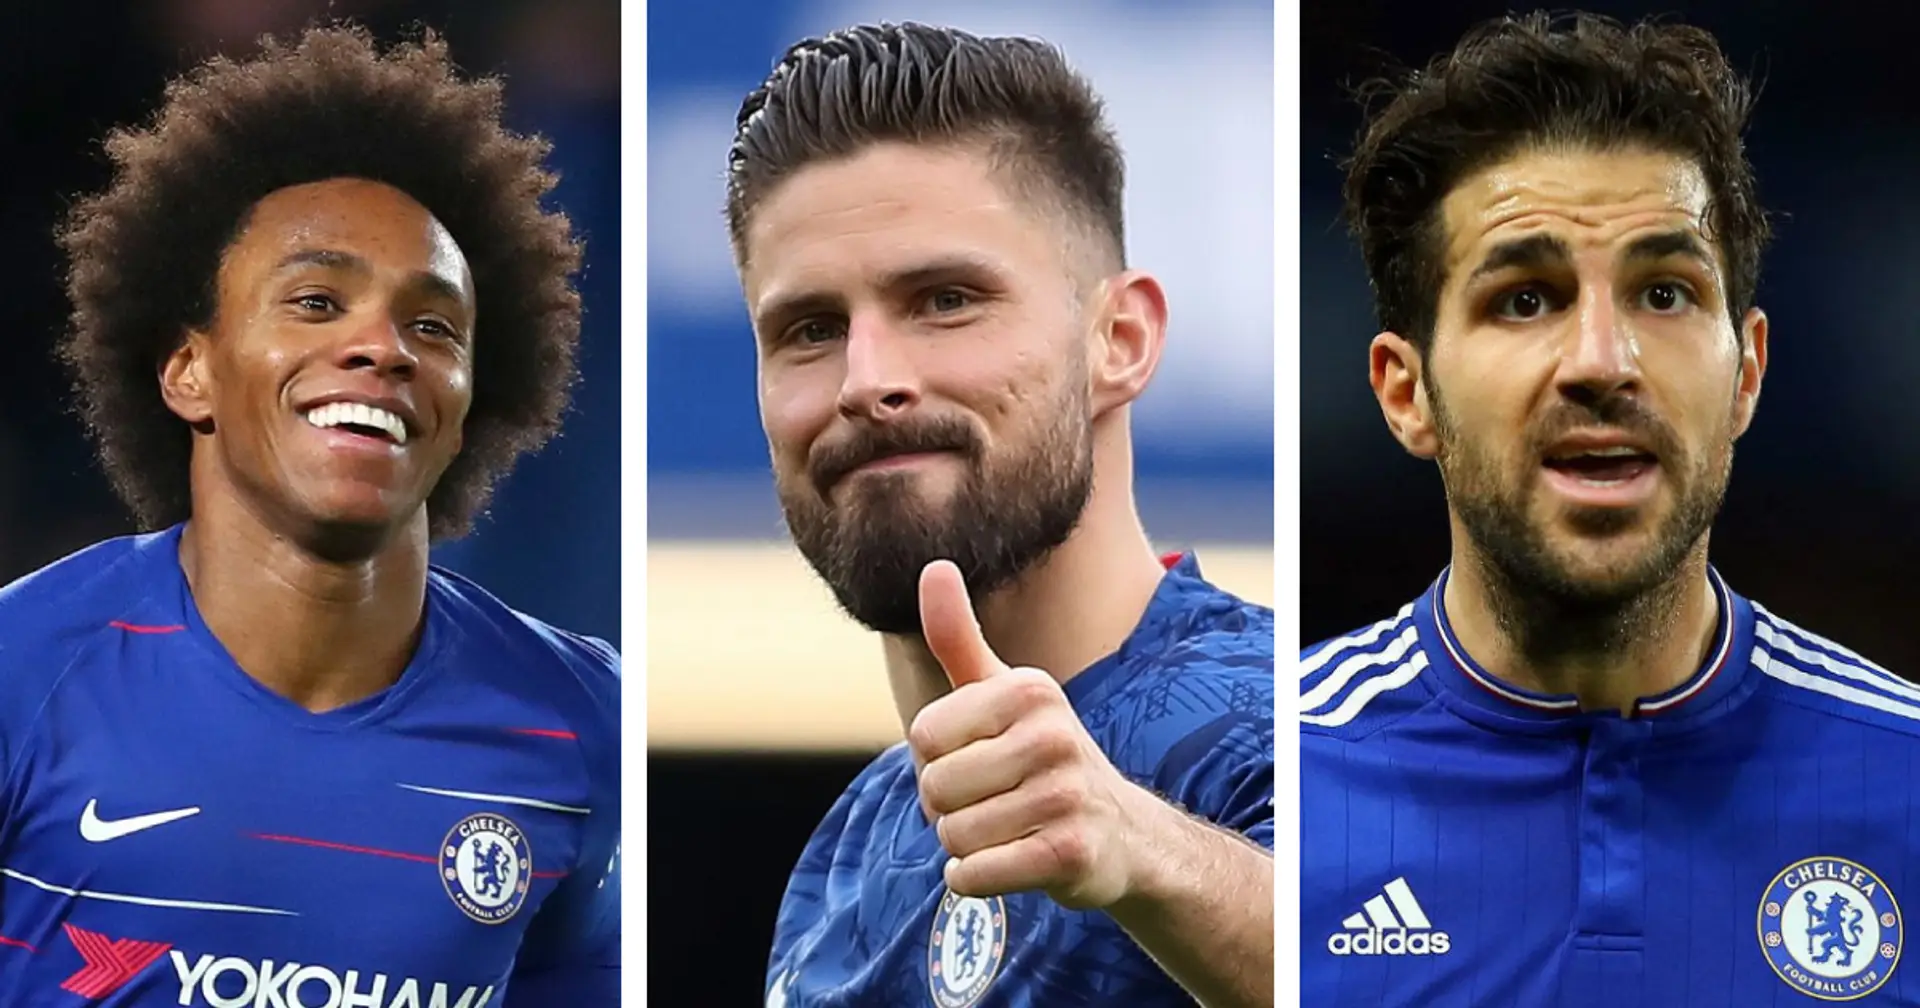 Cesc, Willian & 5 more players who were happier at Chelsea than at Arsenal